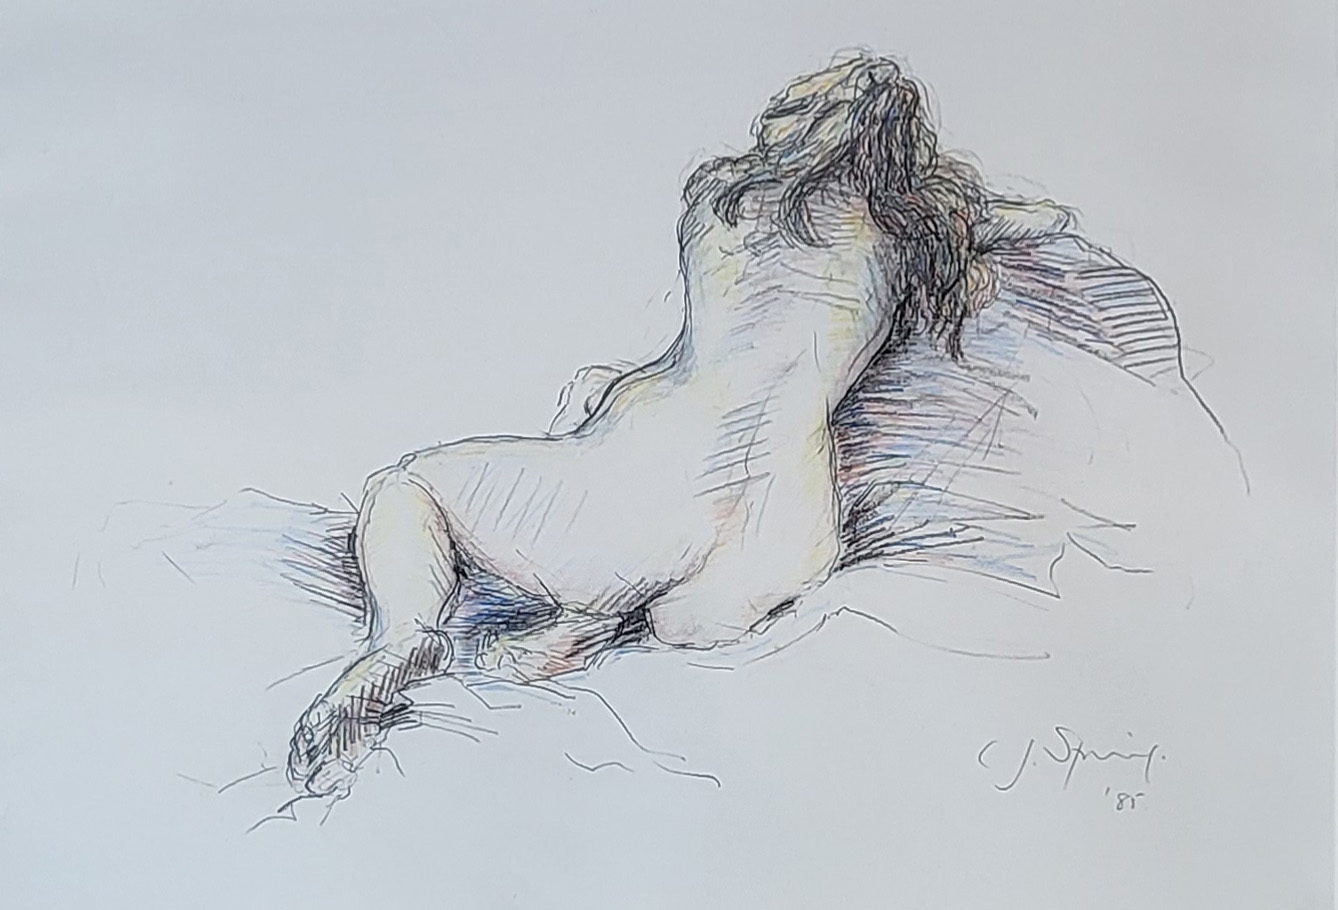 CHRIS SPRING, A 20TH CENTURY PASTEL NUDE STUDY Reclining female, signed C.J. Spring lower right,